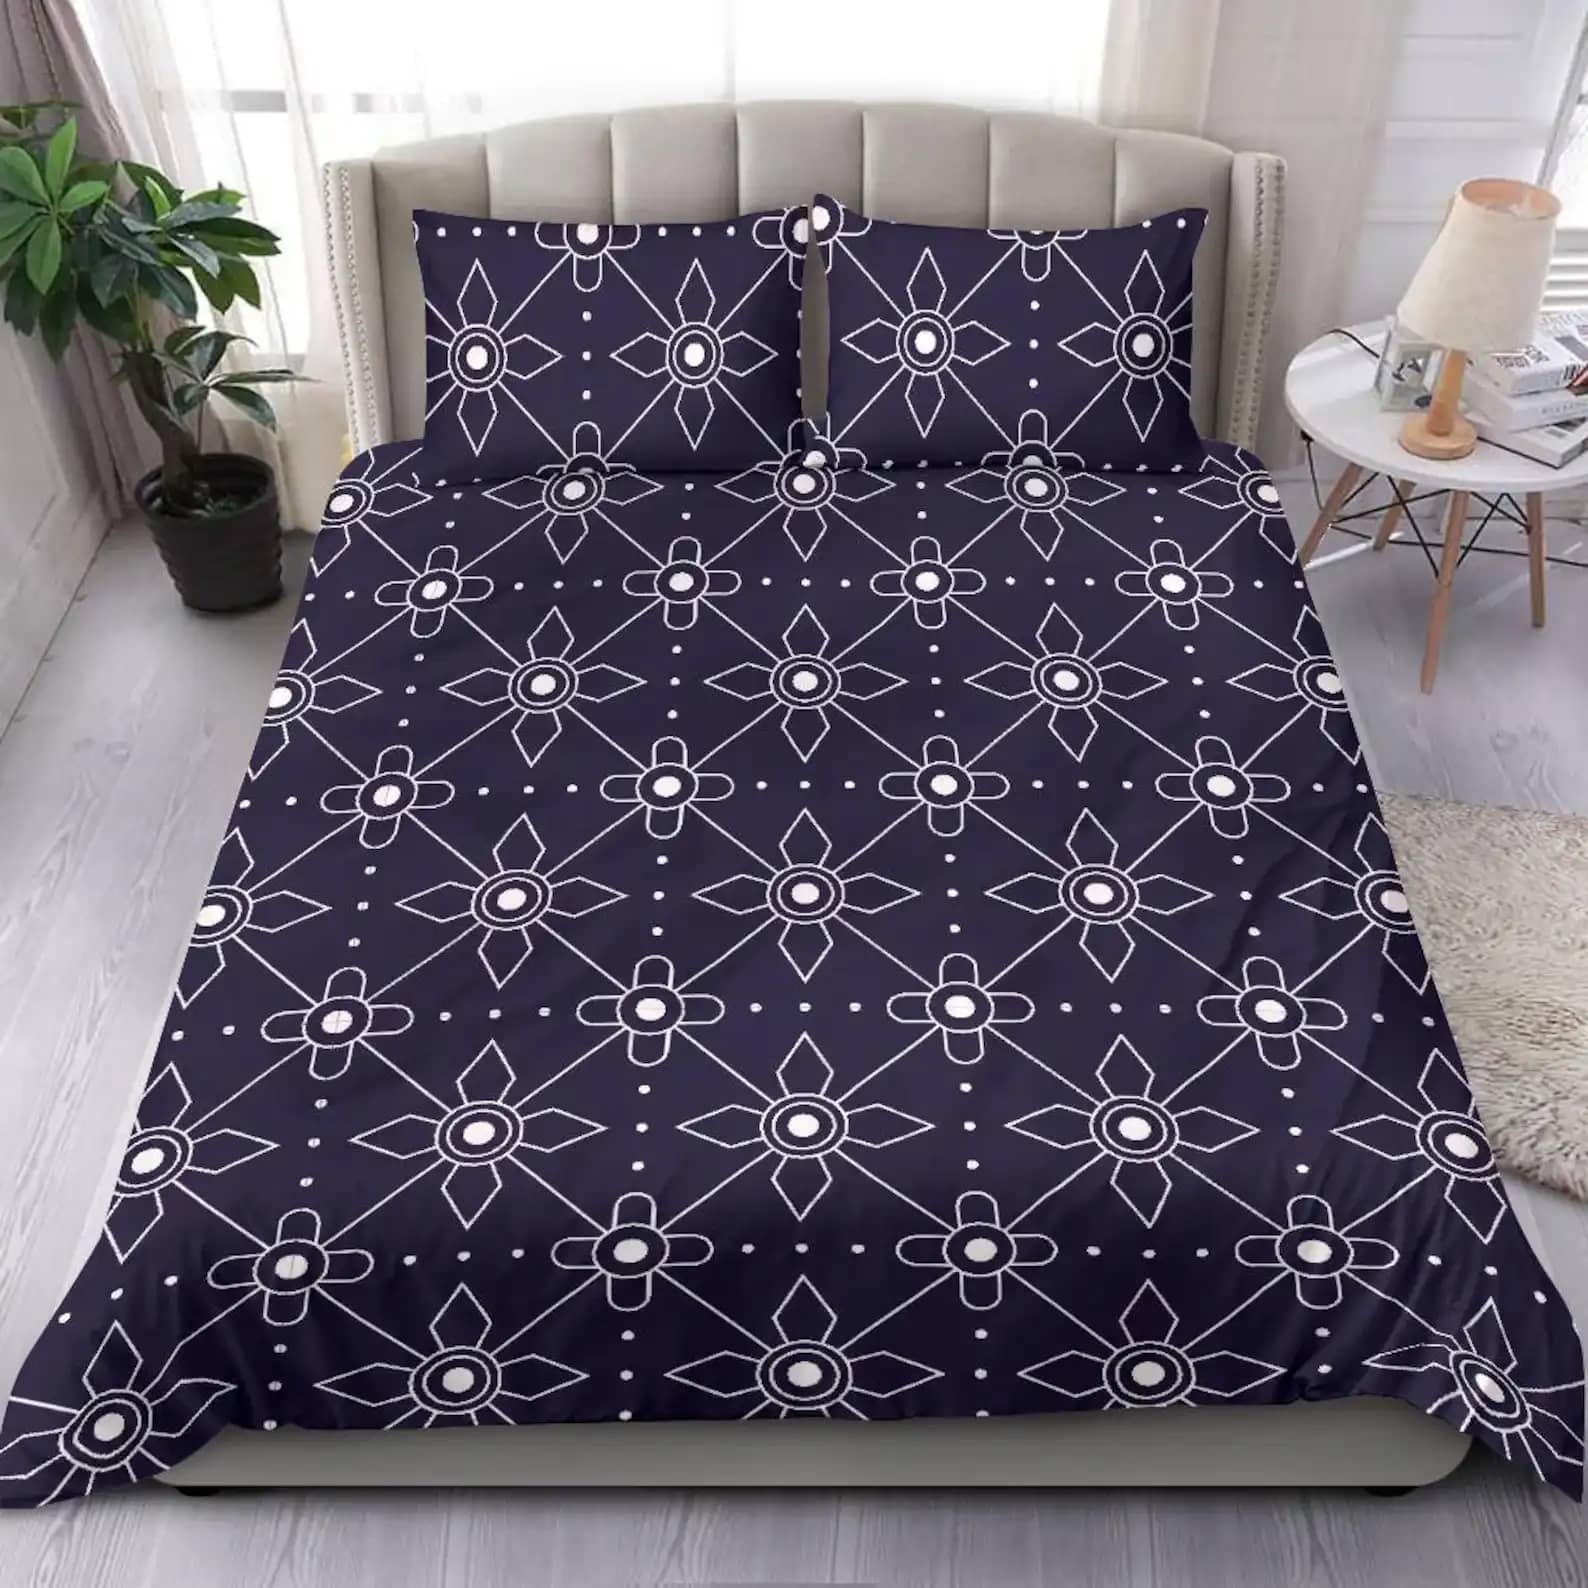 Classic Modern Blue And White Bedroom Decor Aesthetic Quilt Bedding Sets